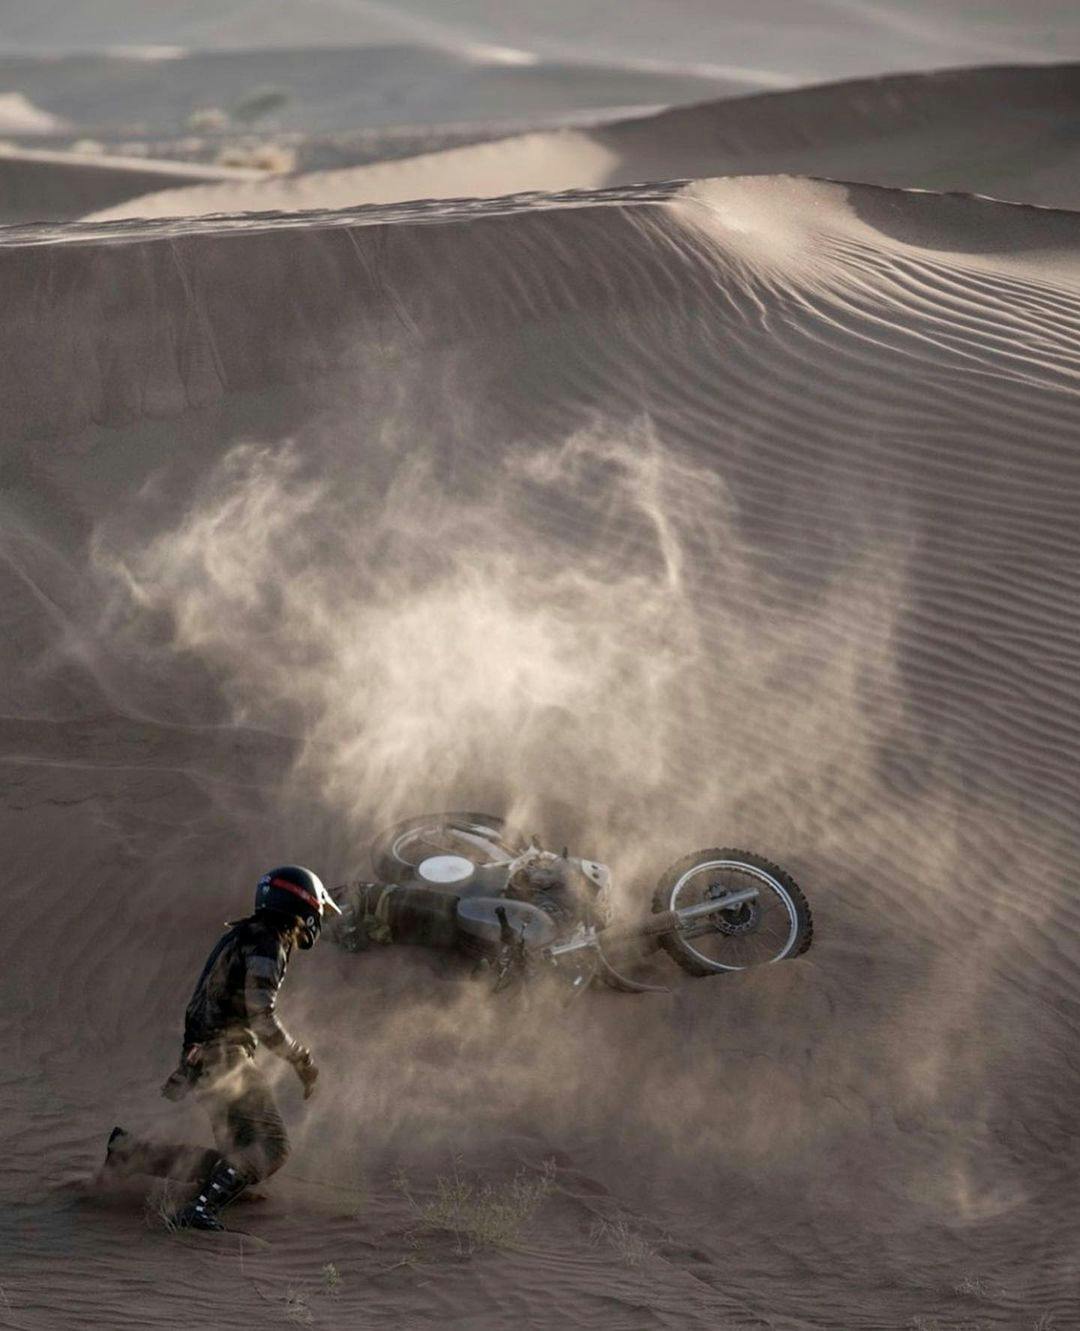 A man falling with his bike on the Sahara Dunes